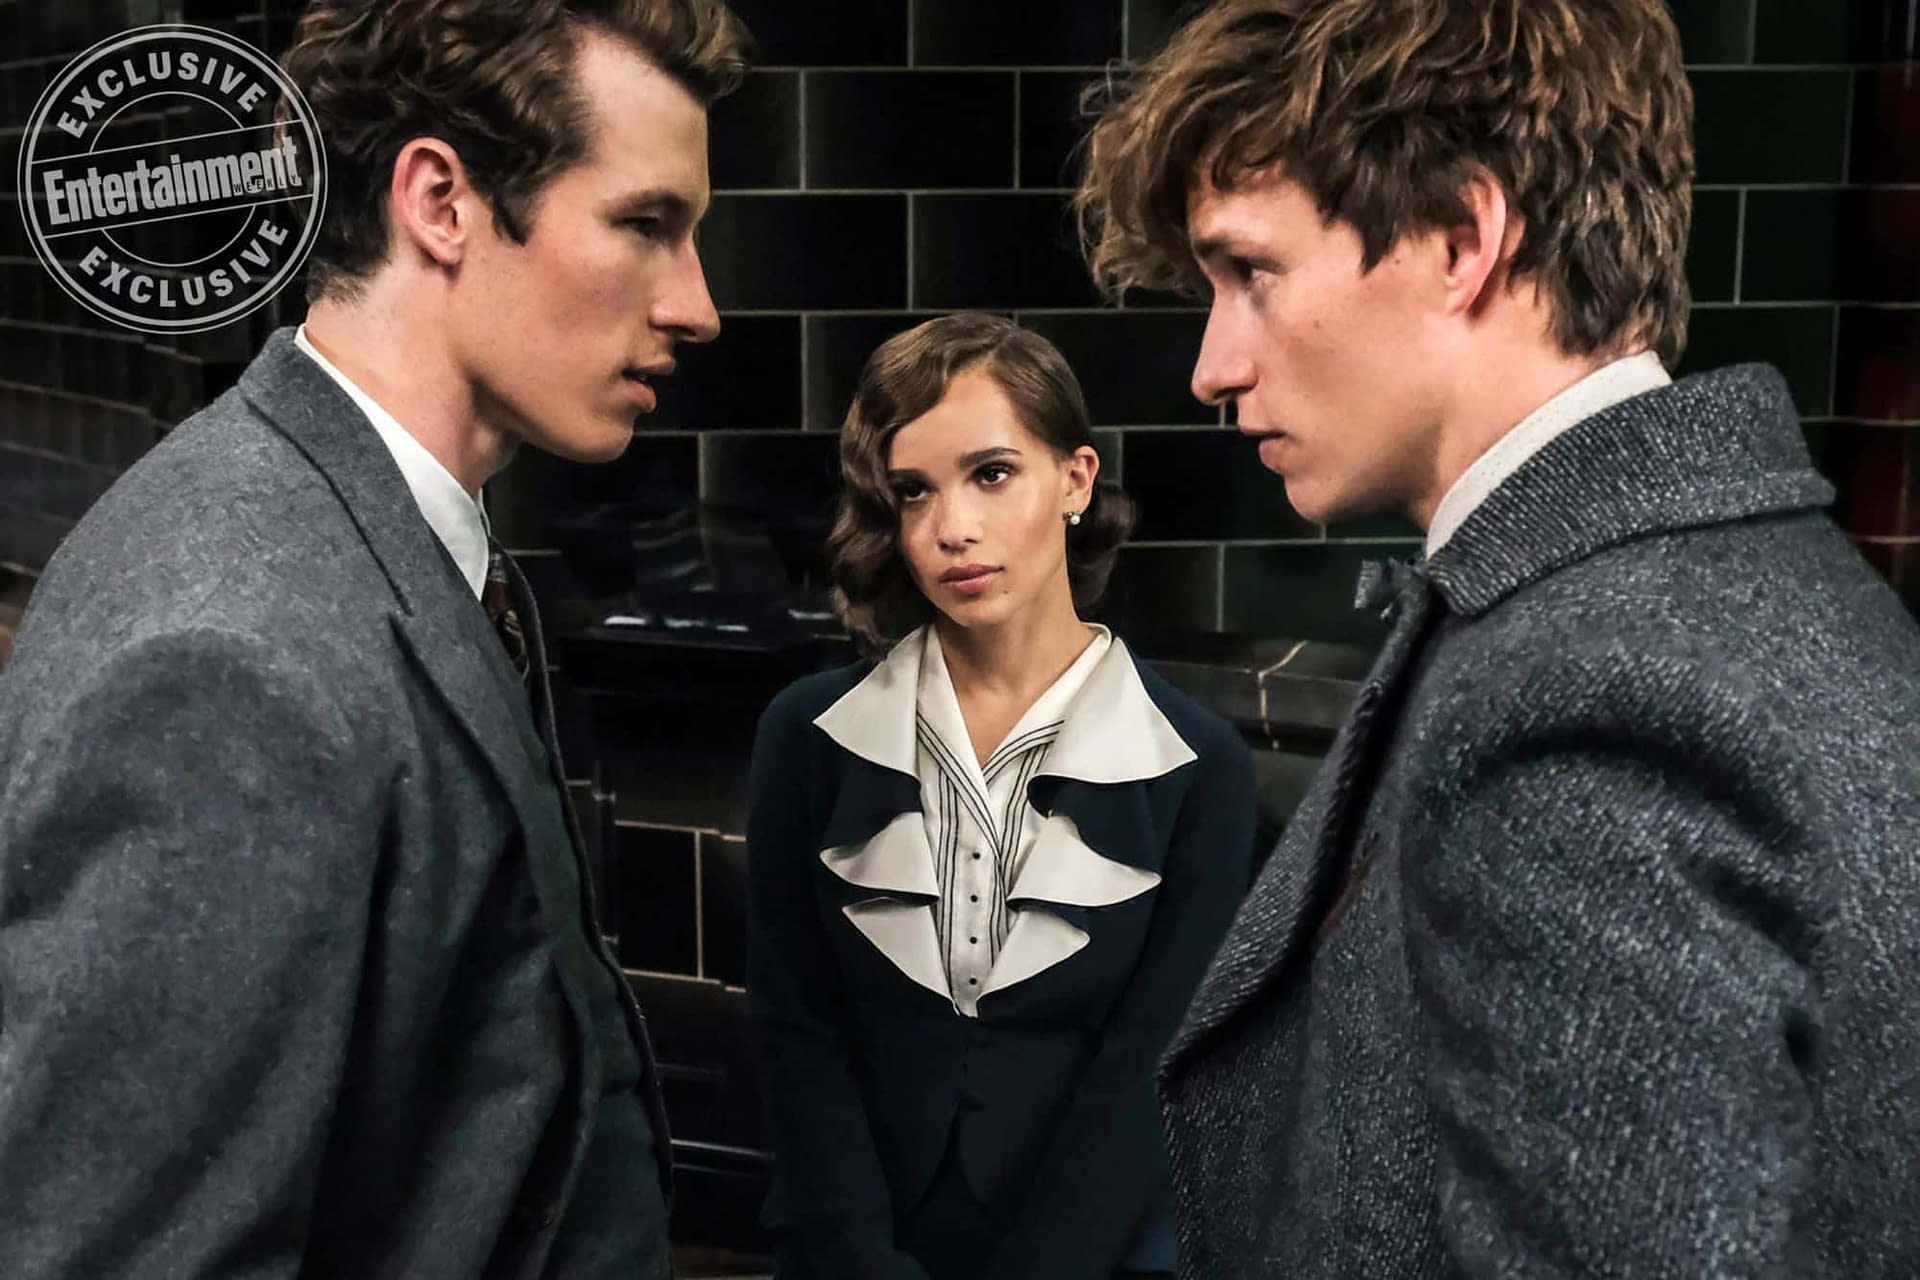 A Brotherly Stare-Down in New Image from Fantastic Beasts: The Crimes of Grindelwald